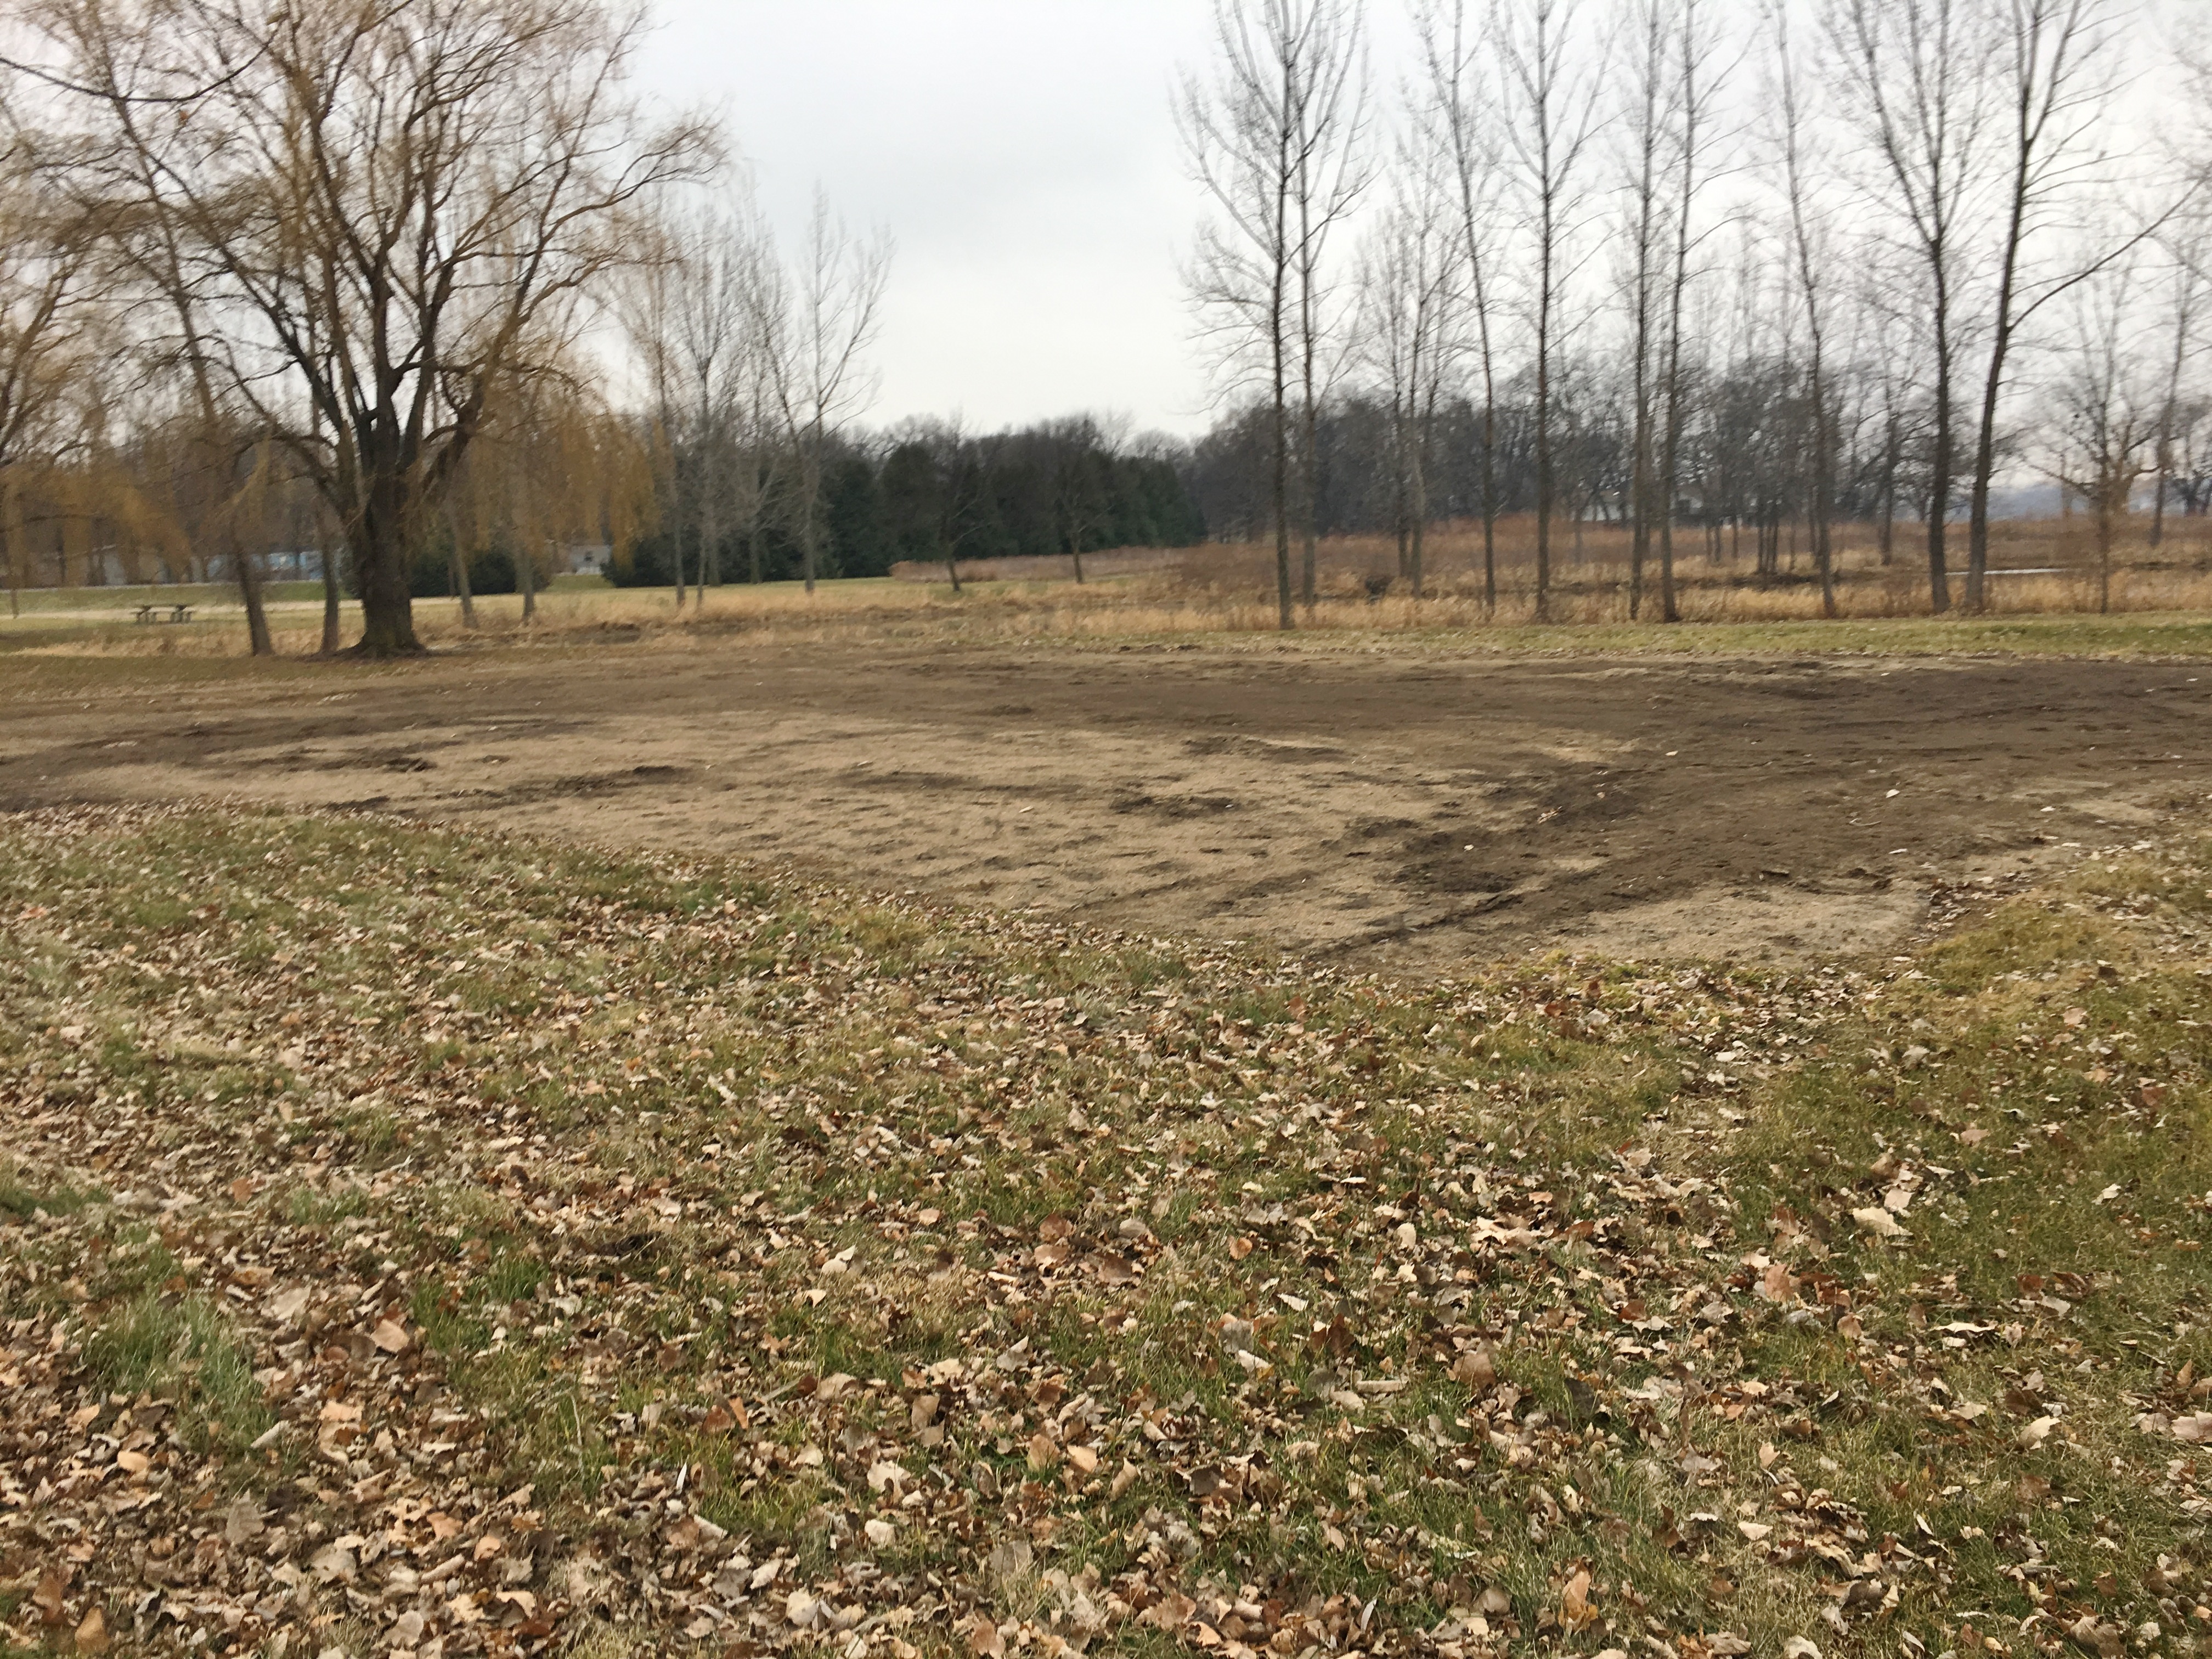 Empty area for new playground equipment to be installed